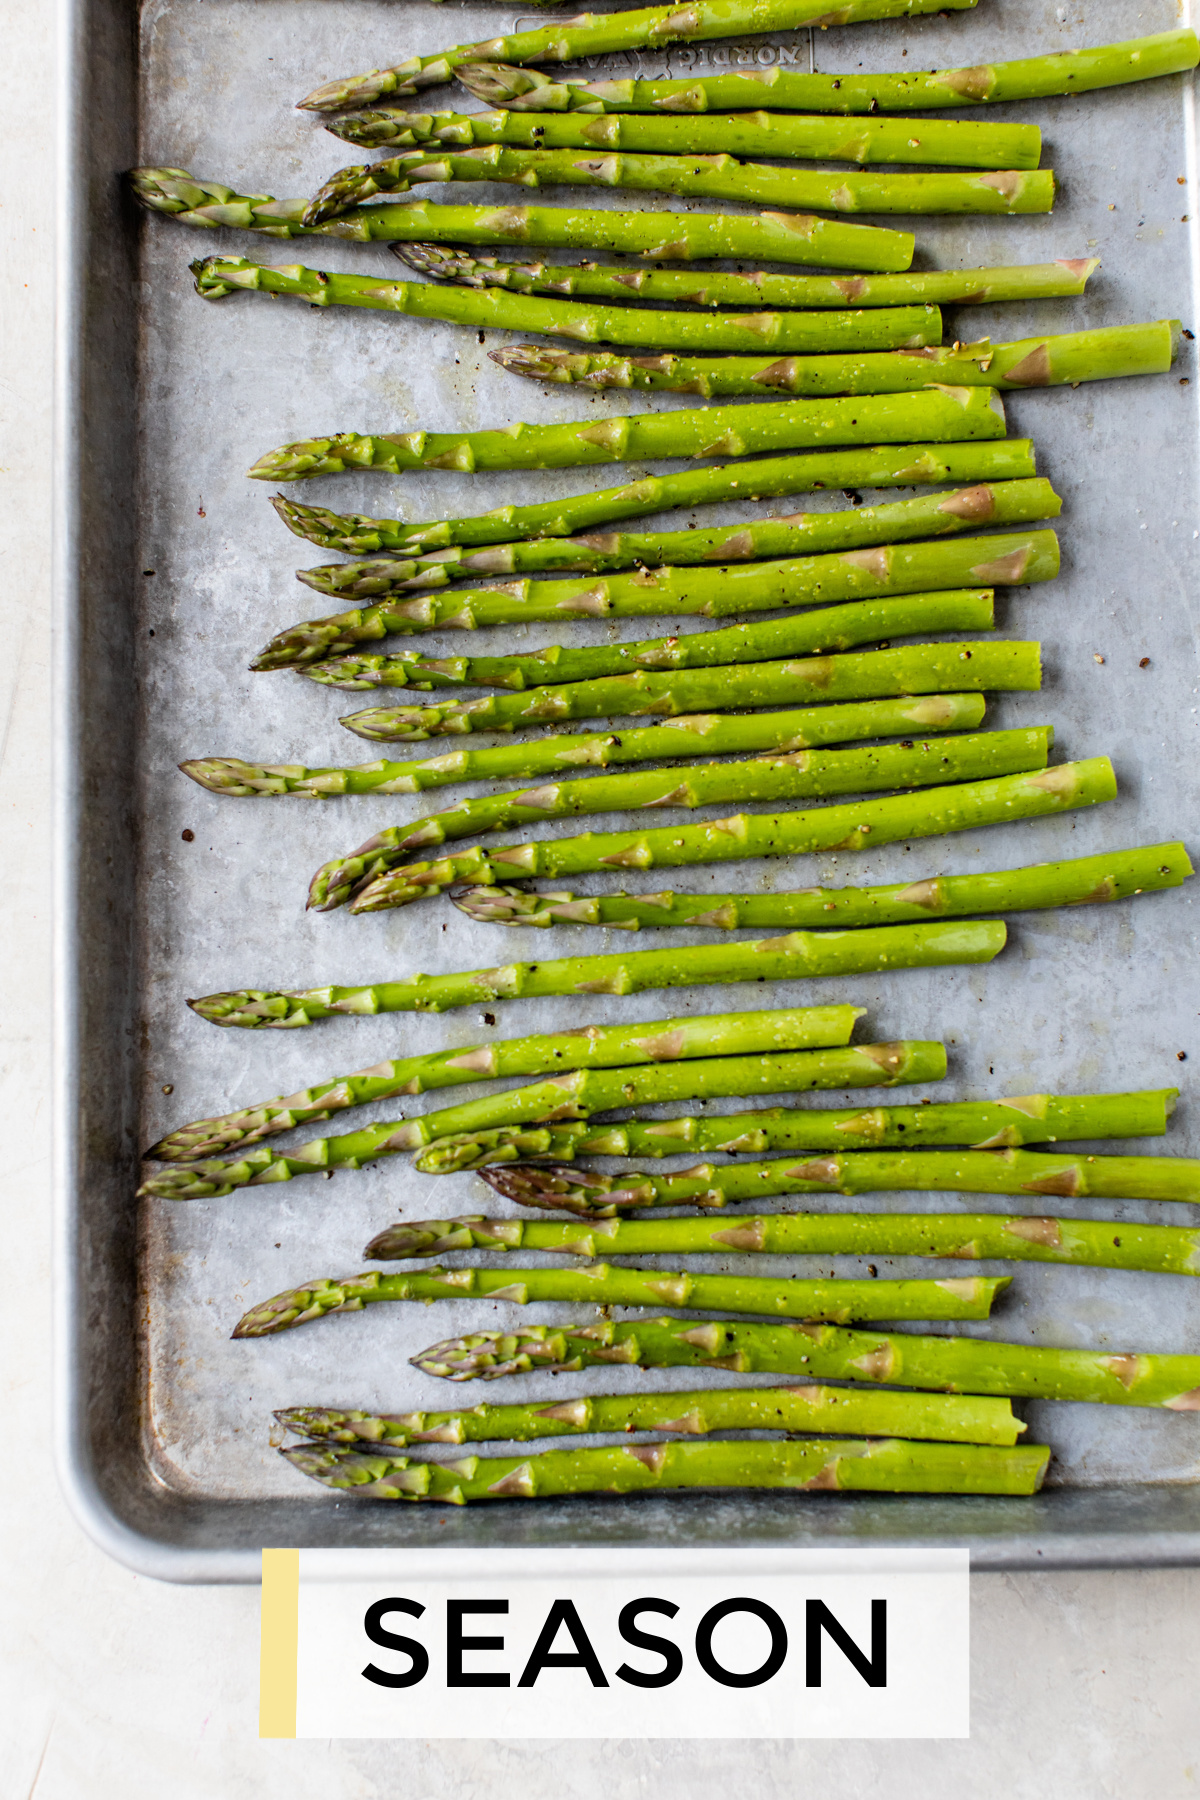 Asparagus on a rimmed baking tray seasoned with salt pepper and olive oil.